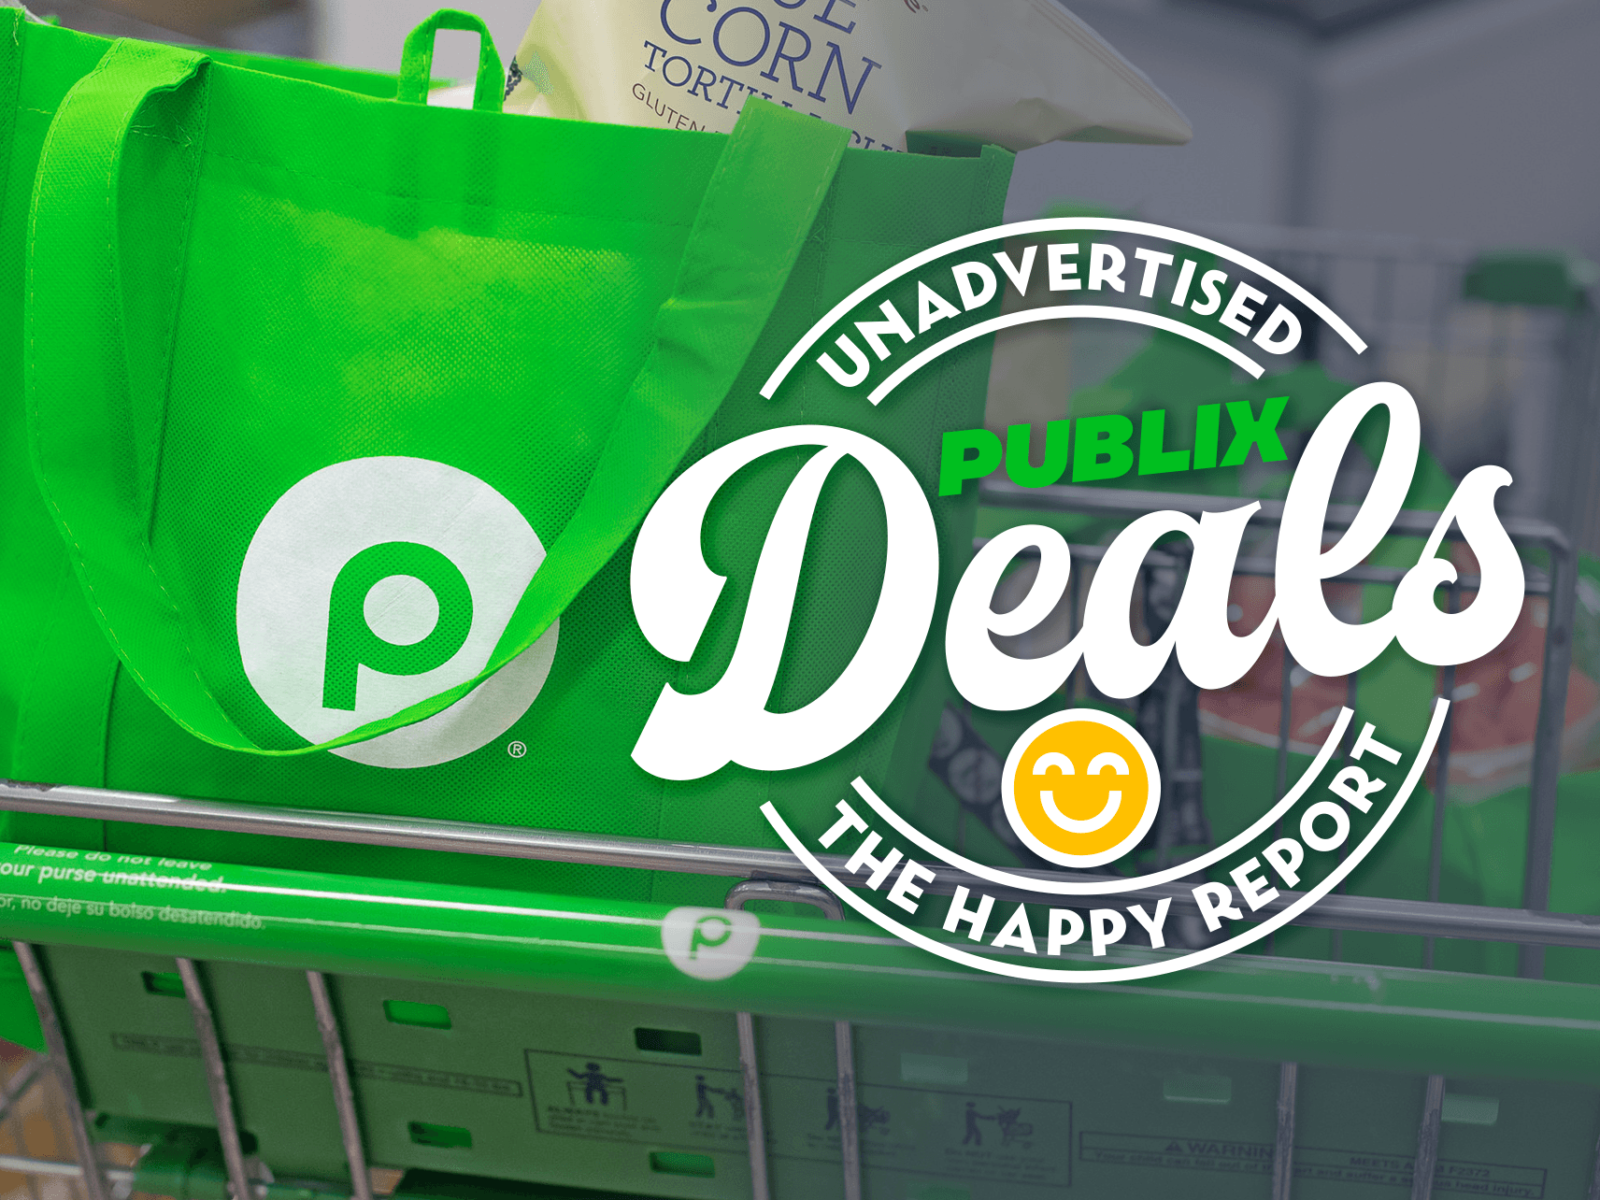 Unadvertised Publix Deals 9/28 – The Happy Report